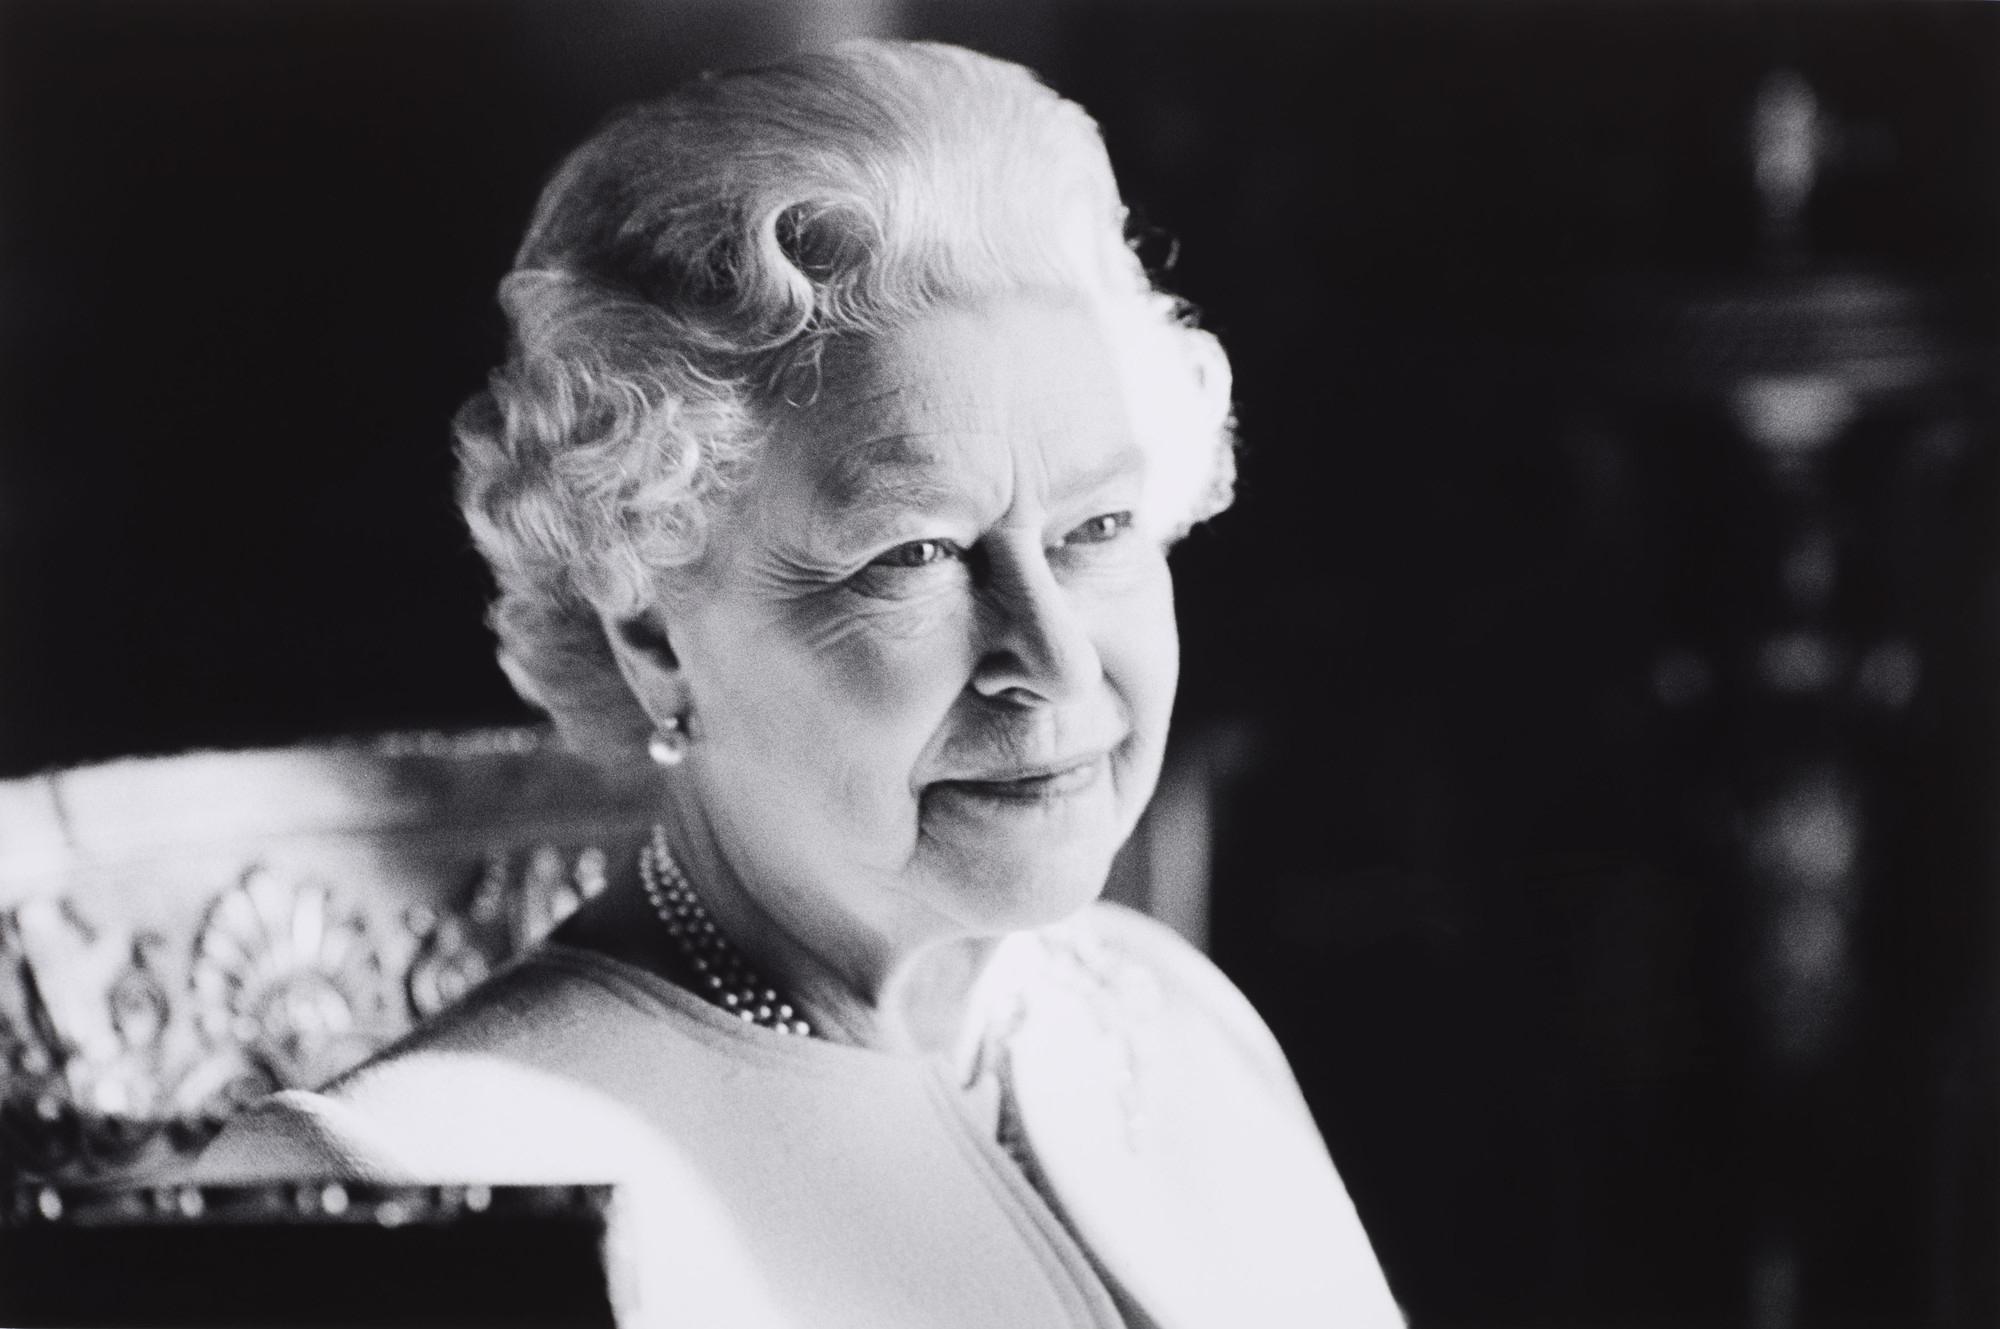 A black and white image of Her Majesty The Queen, Elizabeth II